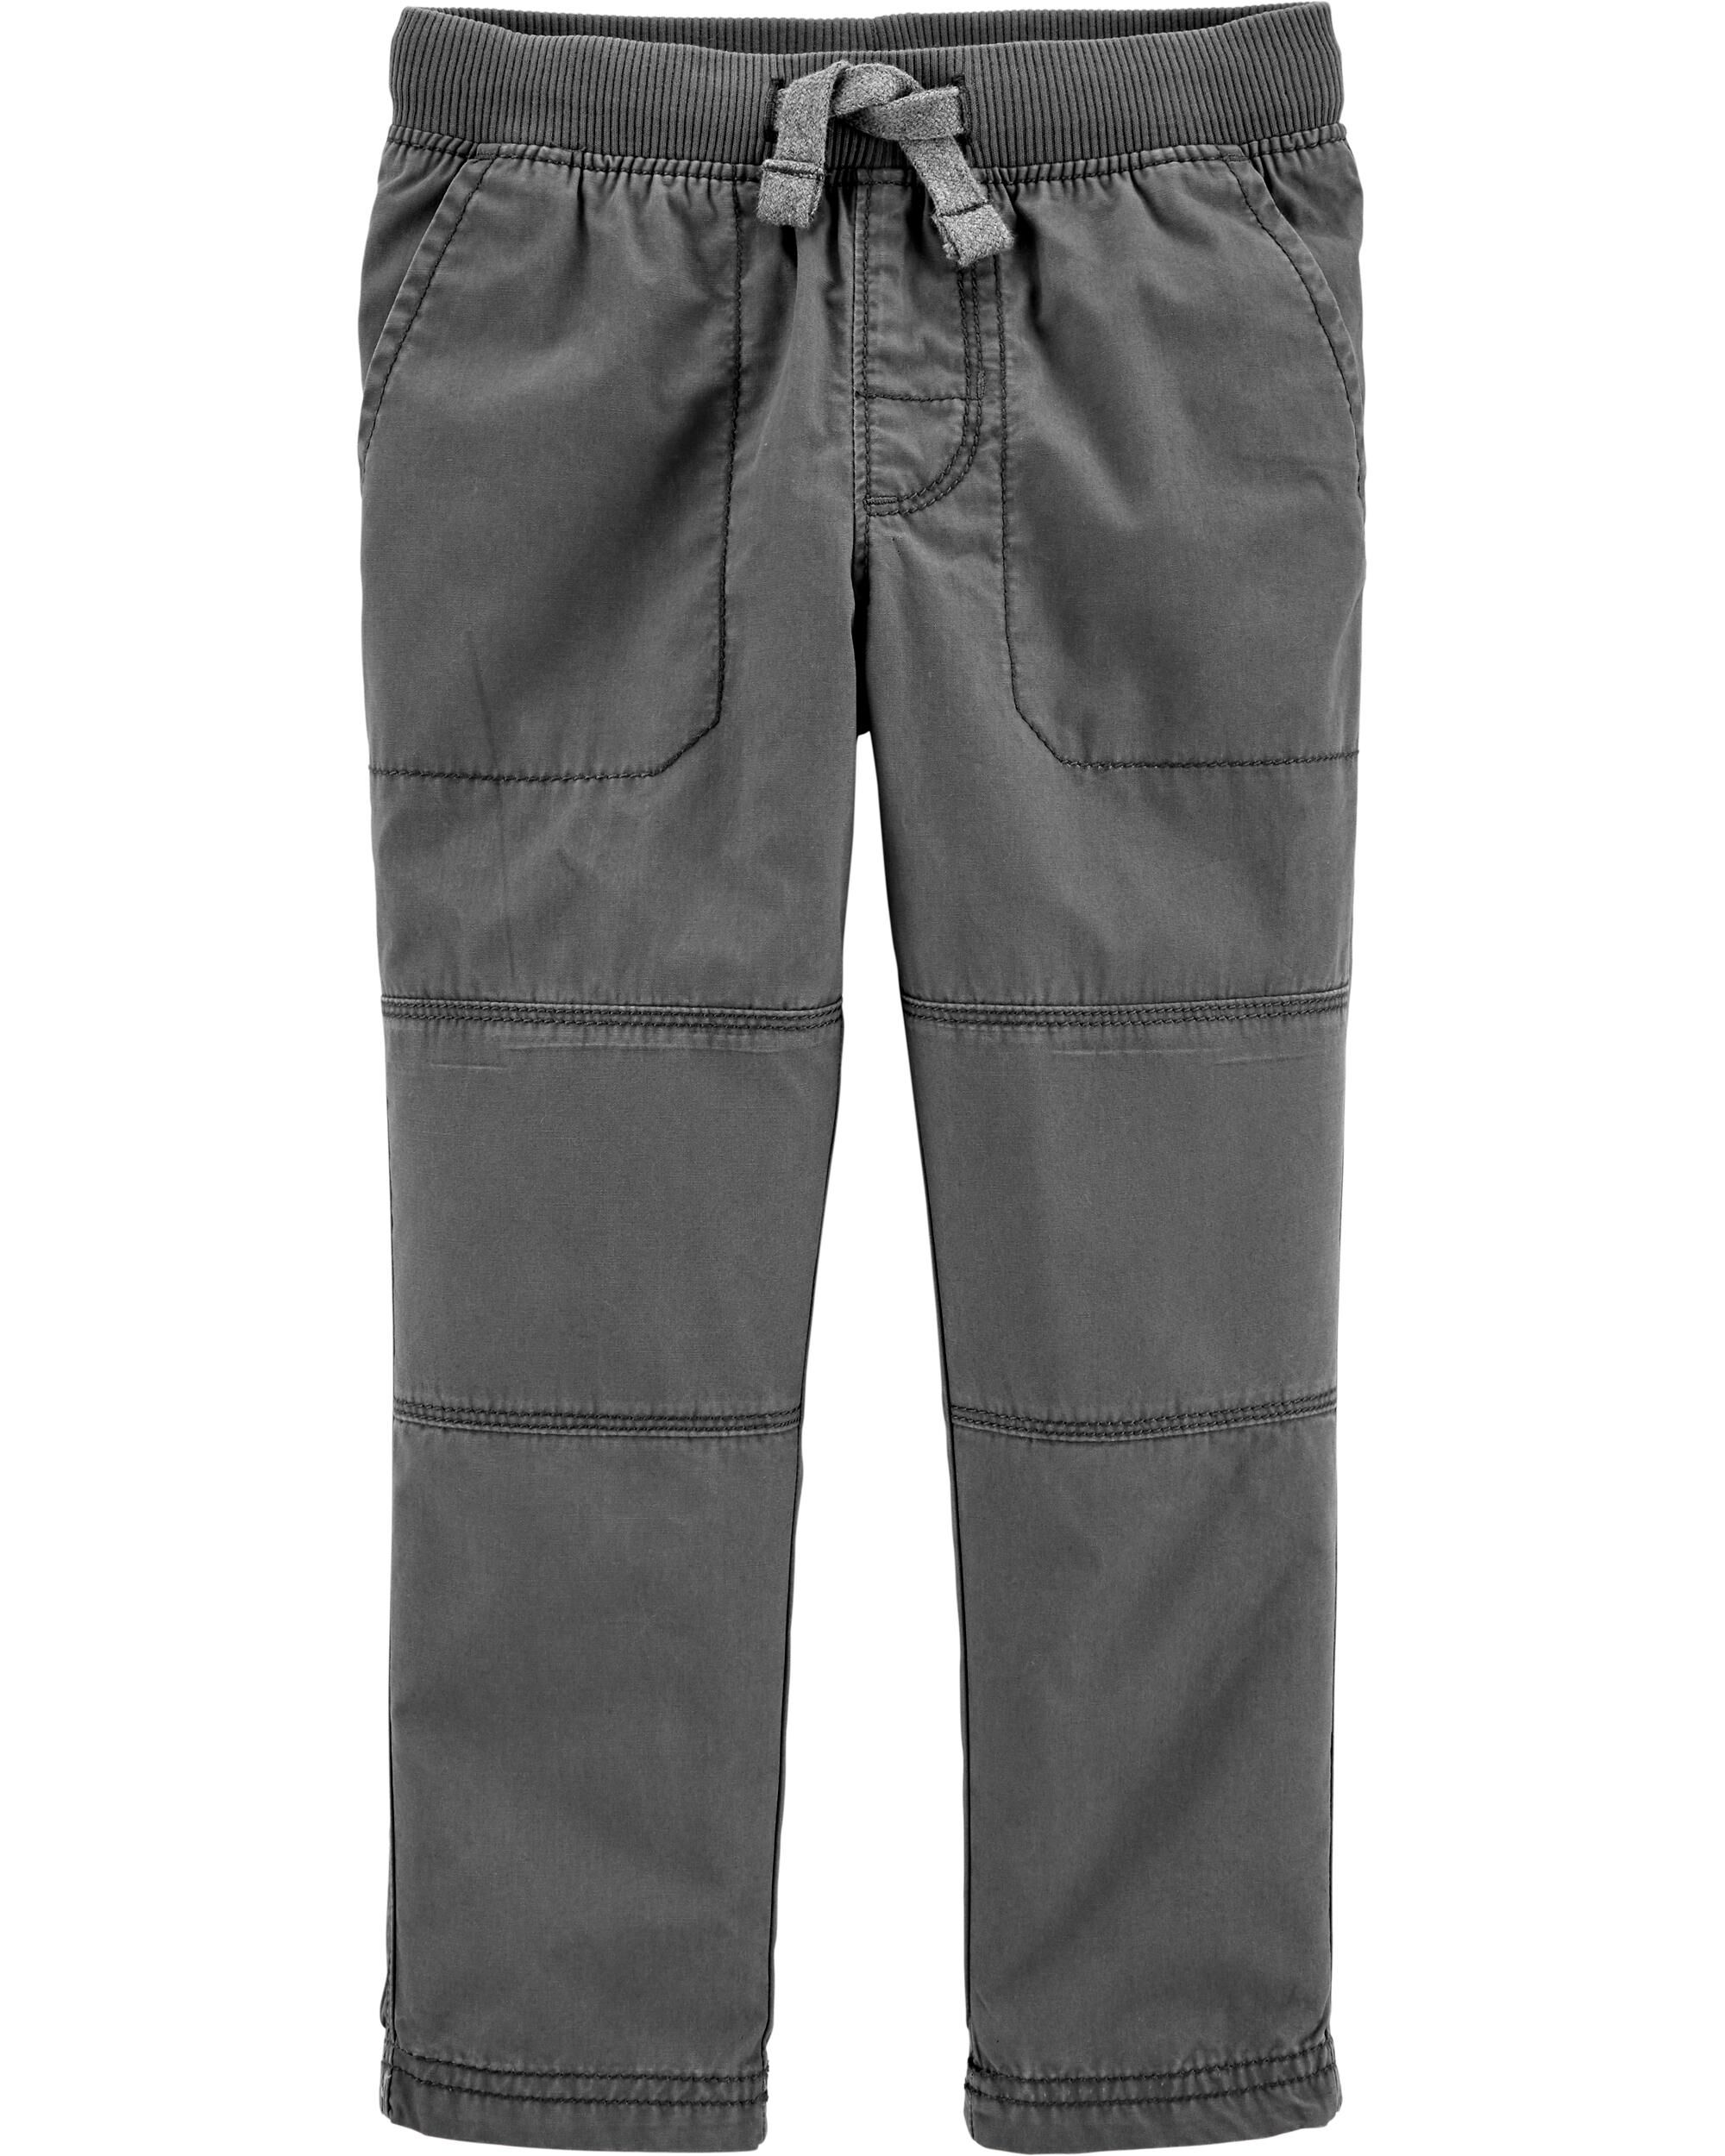 NWT Carter's Boys Pull-On Play Proof Pants Khakis Reinforced Knee many sizes